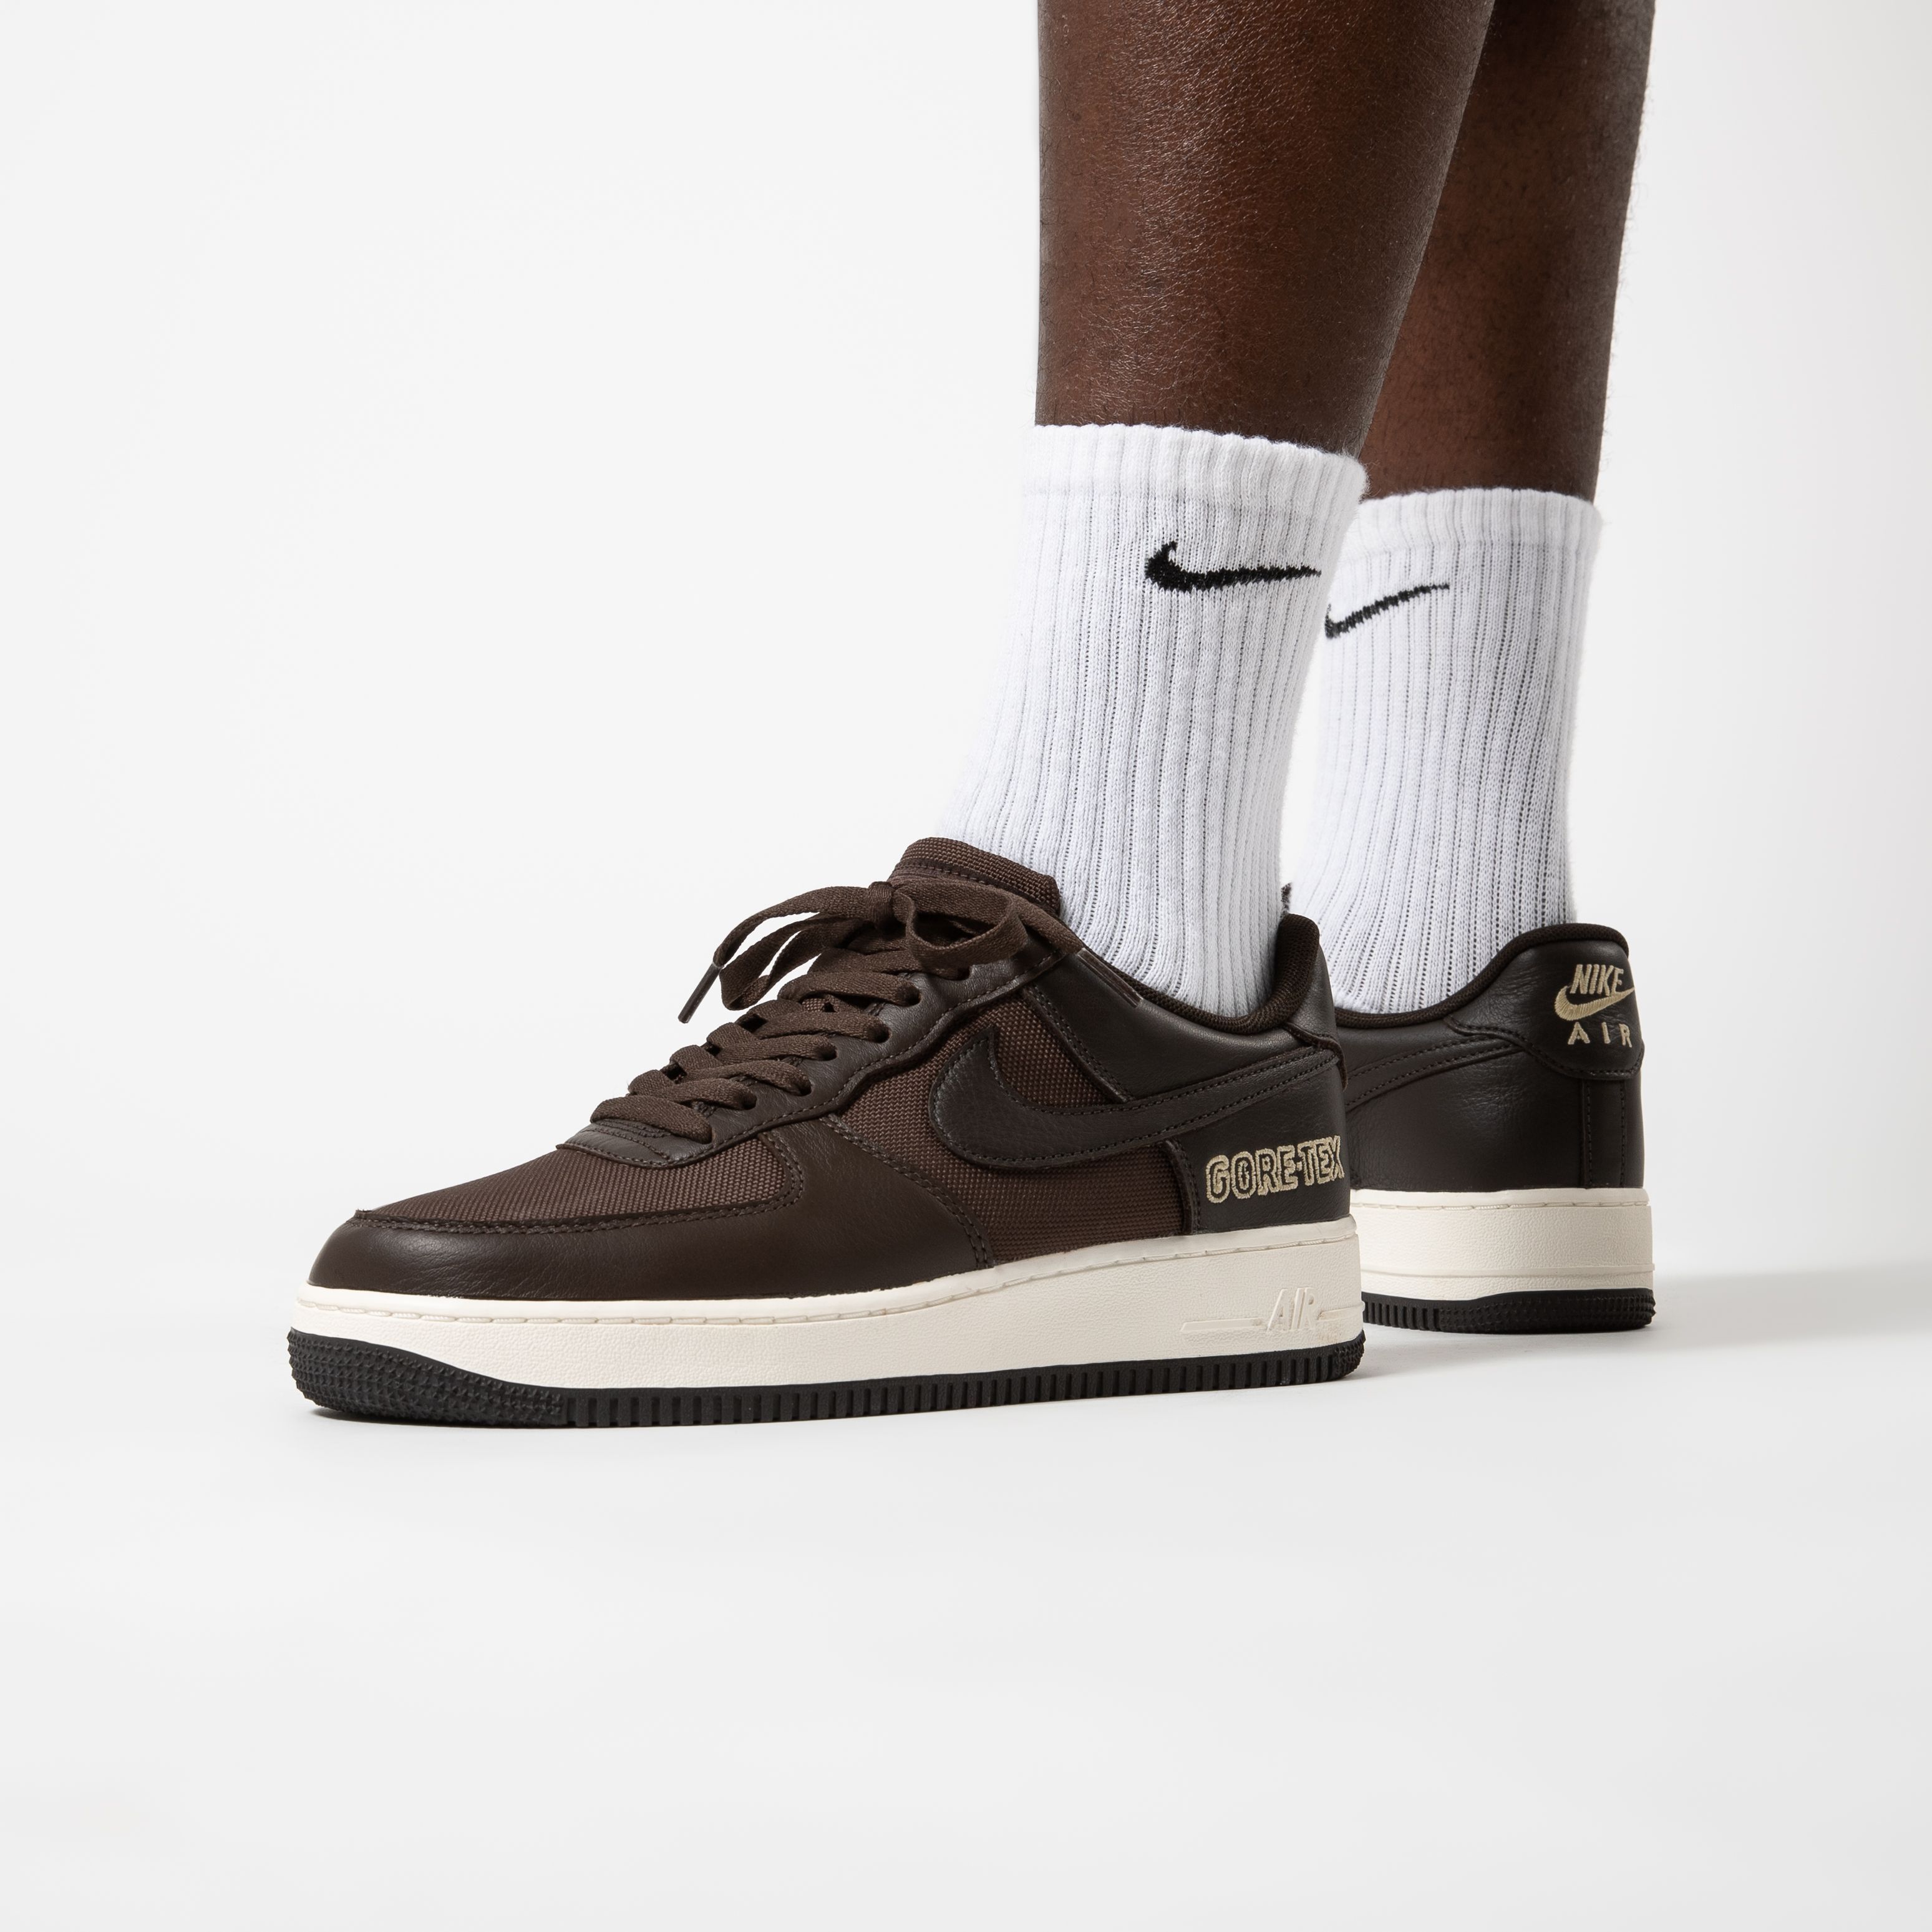 Titolo on Twitter: "NEW 💫 Nike Air Force 1 Gore-Tex "Baroque Brown" click ➡️ https://t.co/WvRSPOpOsw ⁠ US 7 (40) - US (46)⁠ 🔎 CT2858-201⁠ ⁠ #titolo⁠ #titoloSHOP⁠ #nike #goretex #af1 #airforce1 #